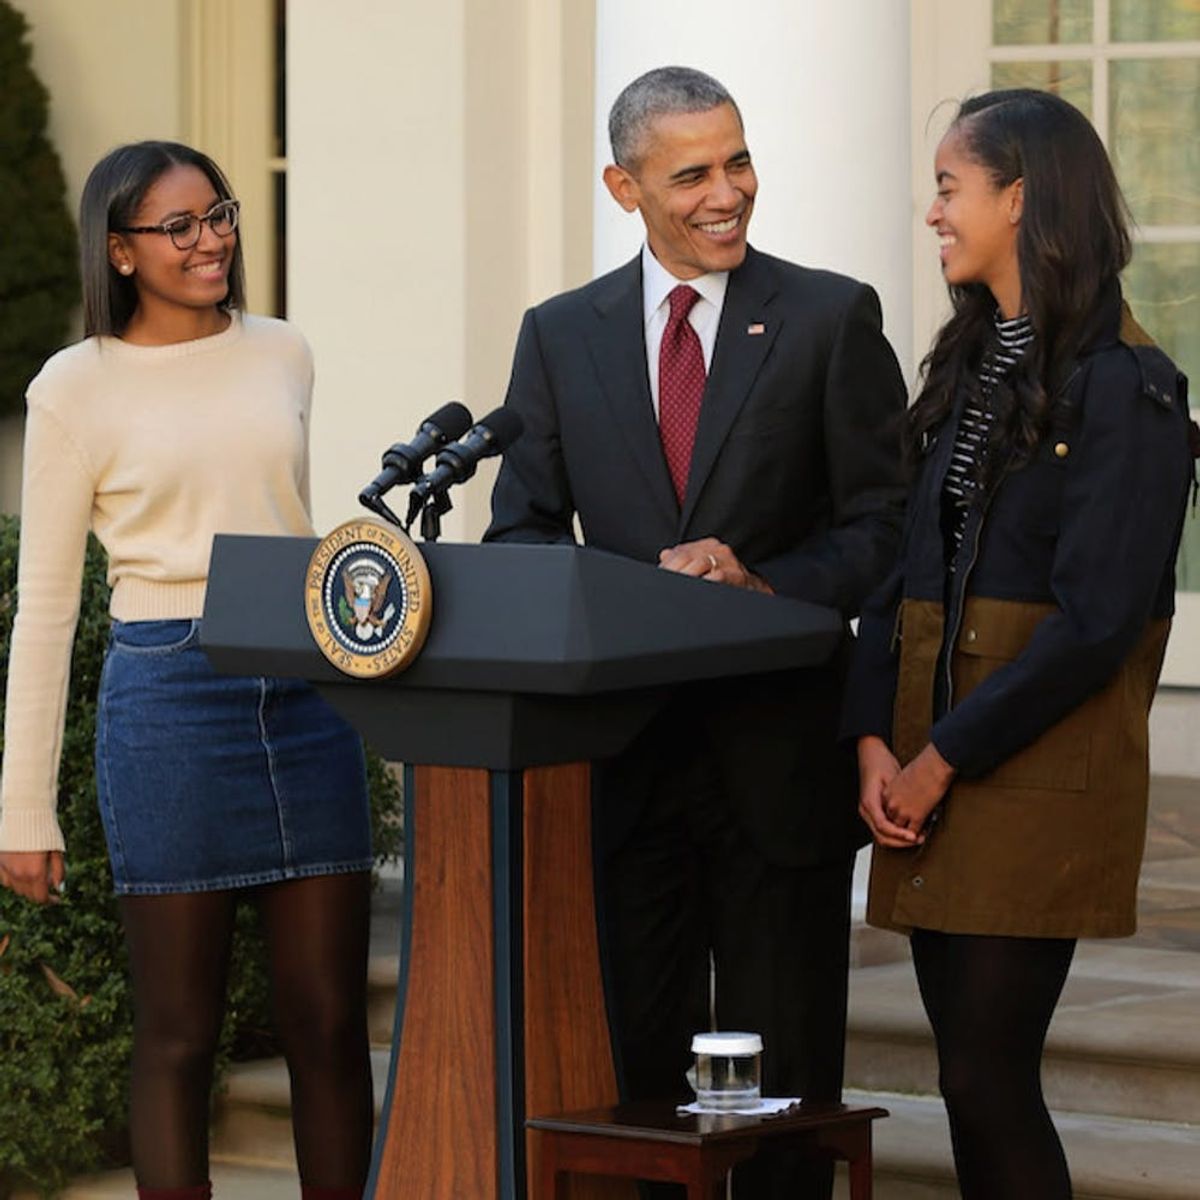 What We Can All Learn from Sasha and Malia Obama’s Reaction to Donald Trump’s Presidency